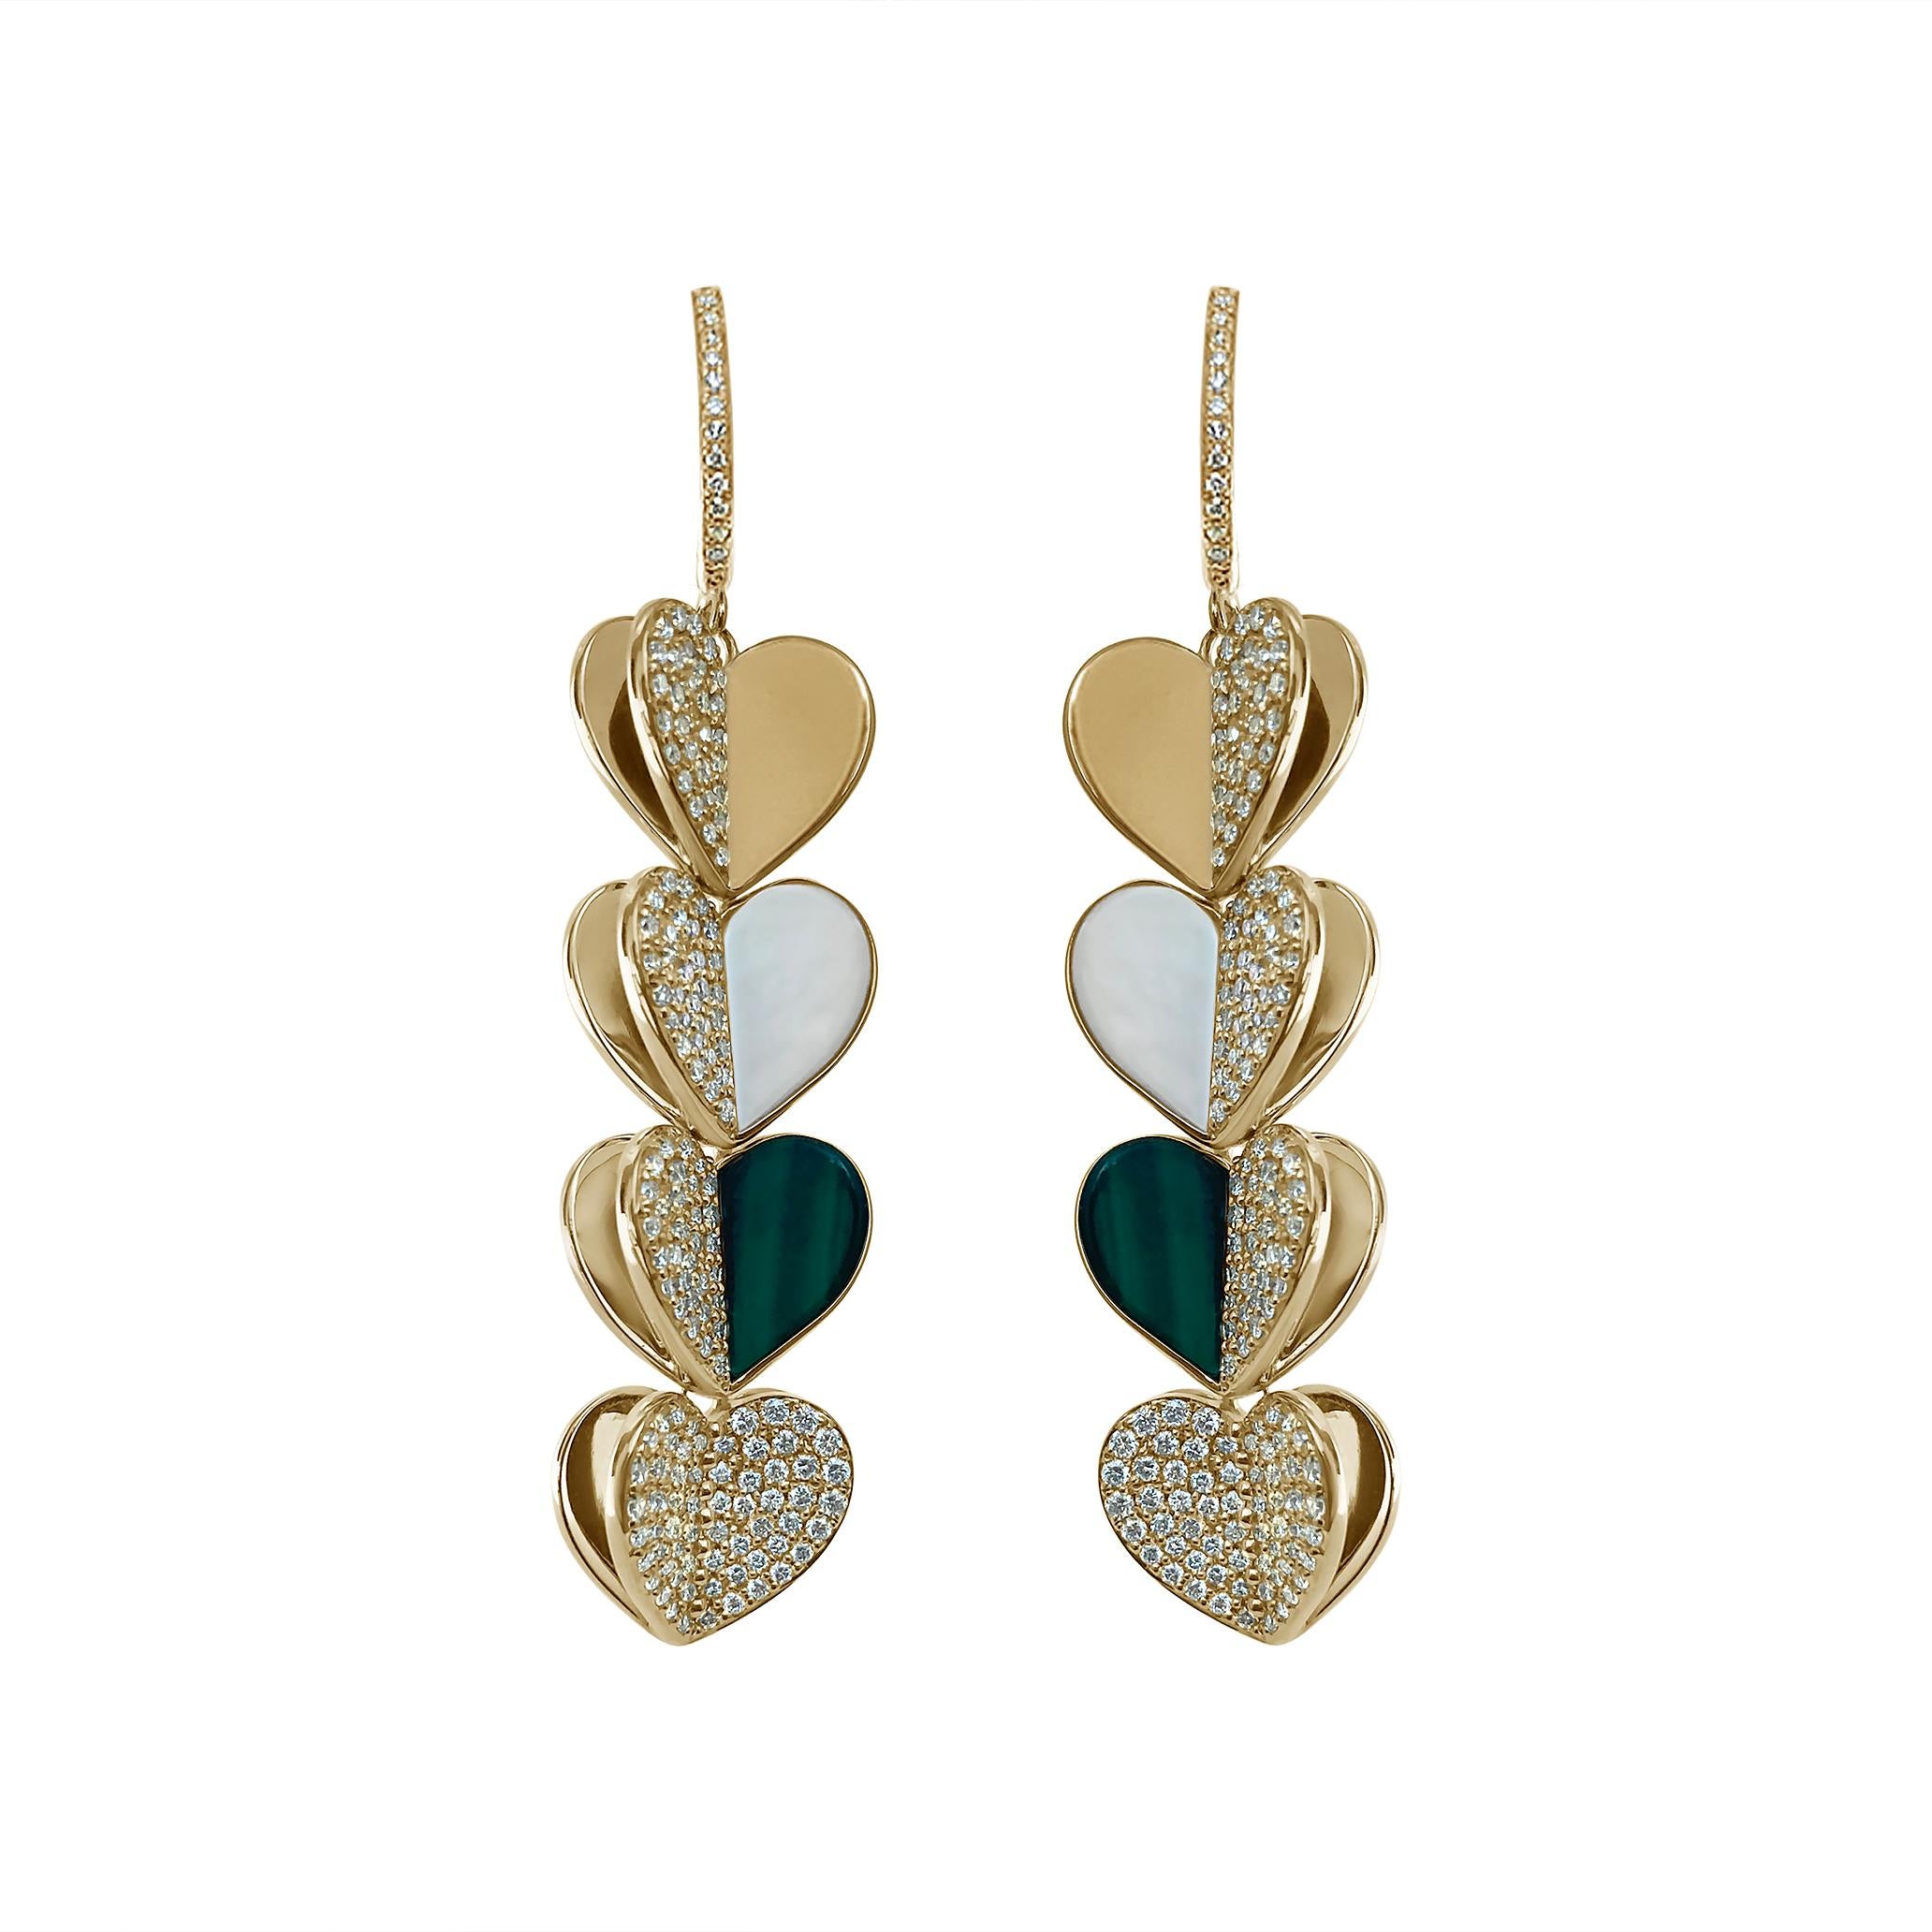 A collection of familiar and playful motifs, this collection is comprised of solid 14k gold pieces and hand carved gemstone pieces, encrusted with diamonds for a modern and luxurious take on these classical motifs. Collect these pieces with a loved